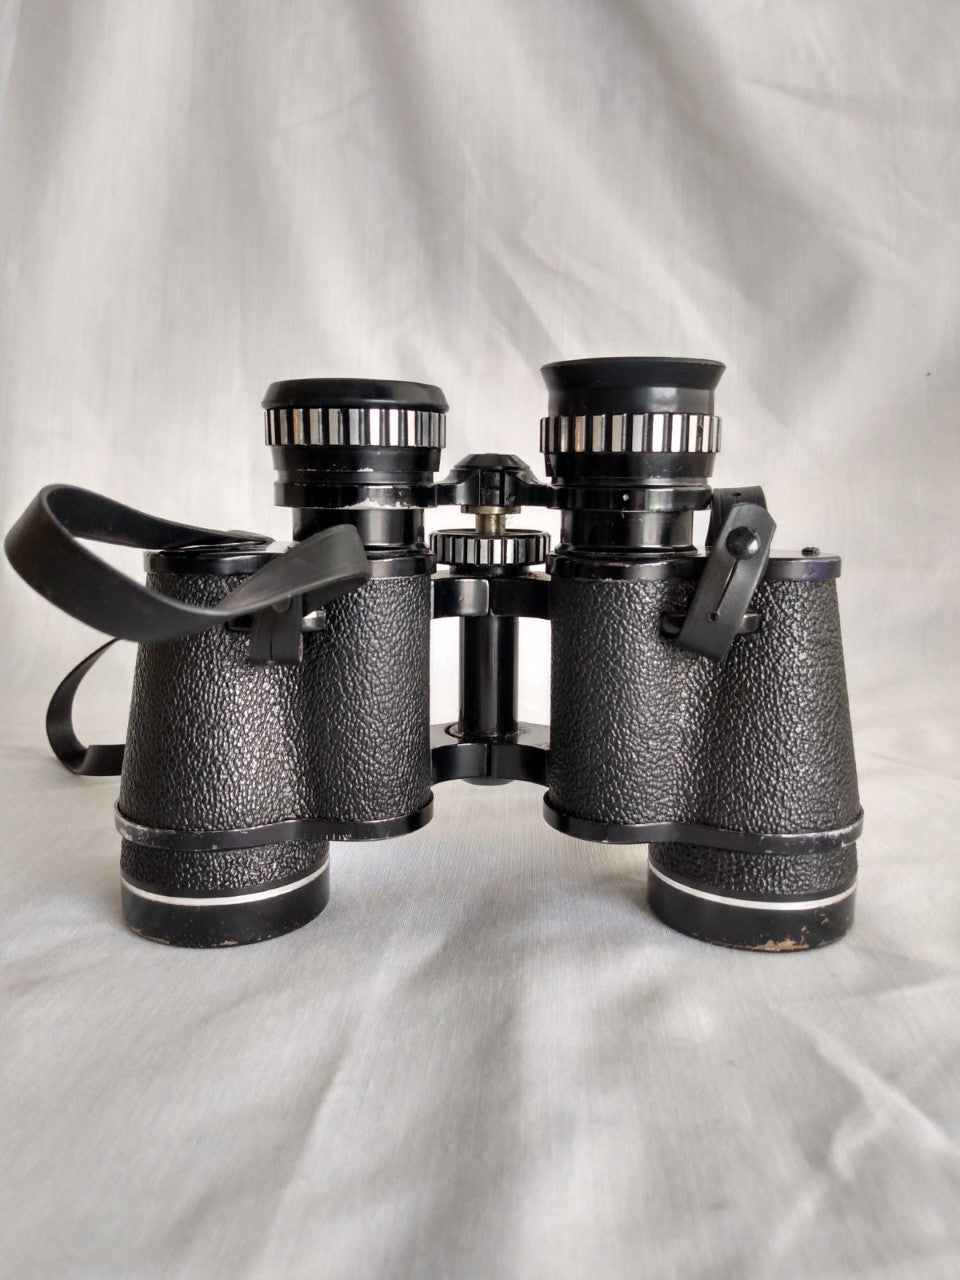 Taylor Wide Angle Binoculars with Case - Model 2802